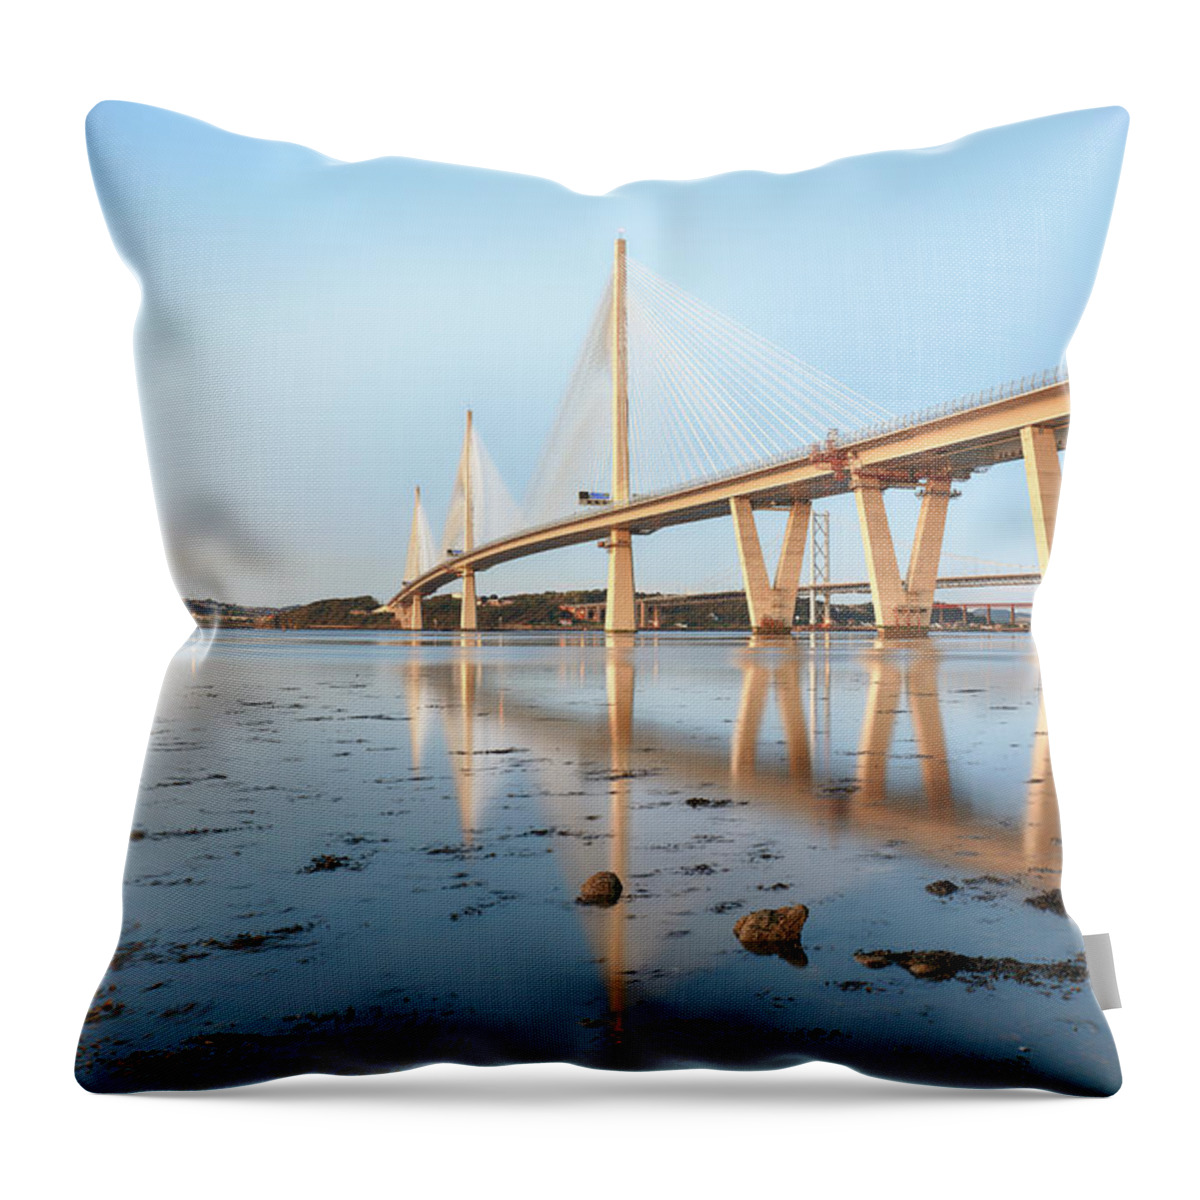 Queensferry Crossing Throw Pillow featuring the photograph Queensferry Crossing 5 by Grant Glendinning